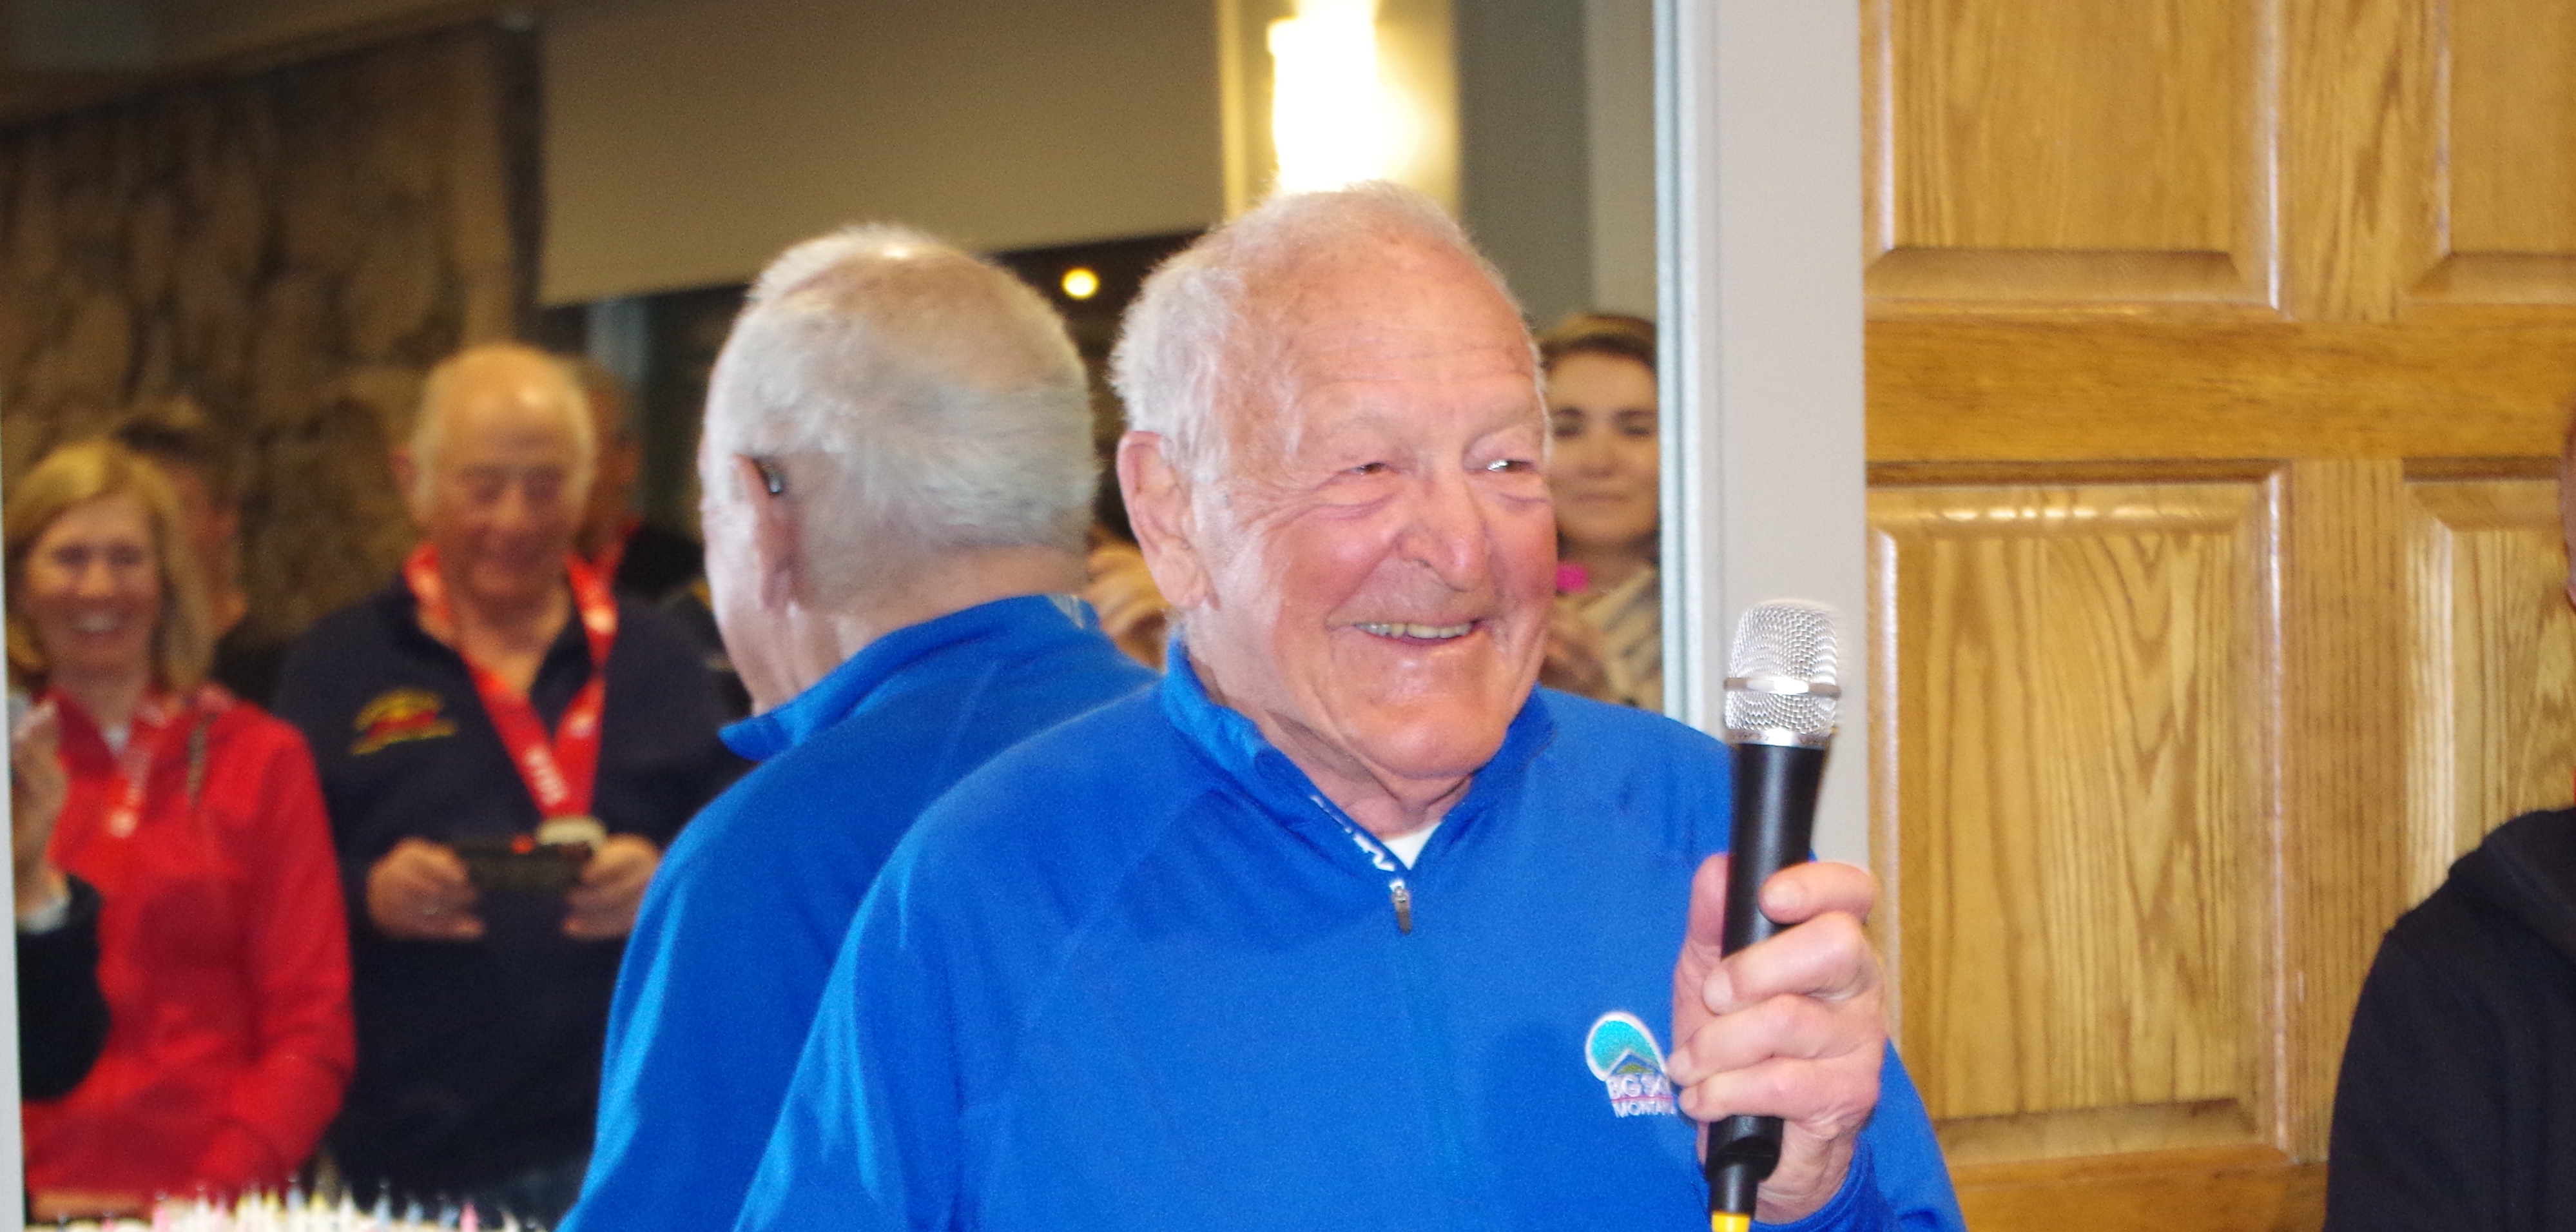 Gate holding a microphone and addressing the crowd at his 90th birthday celebration at the 2019 FIS Masters Cup in Aspen